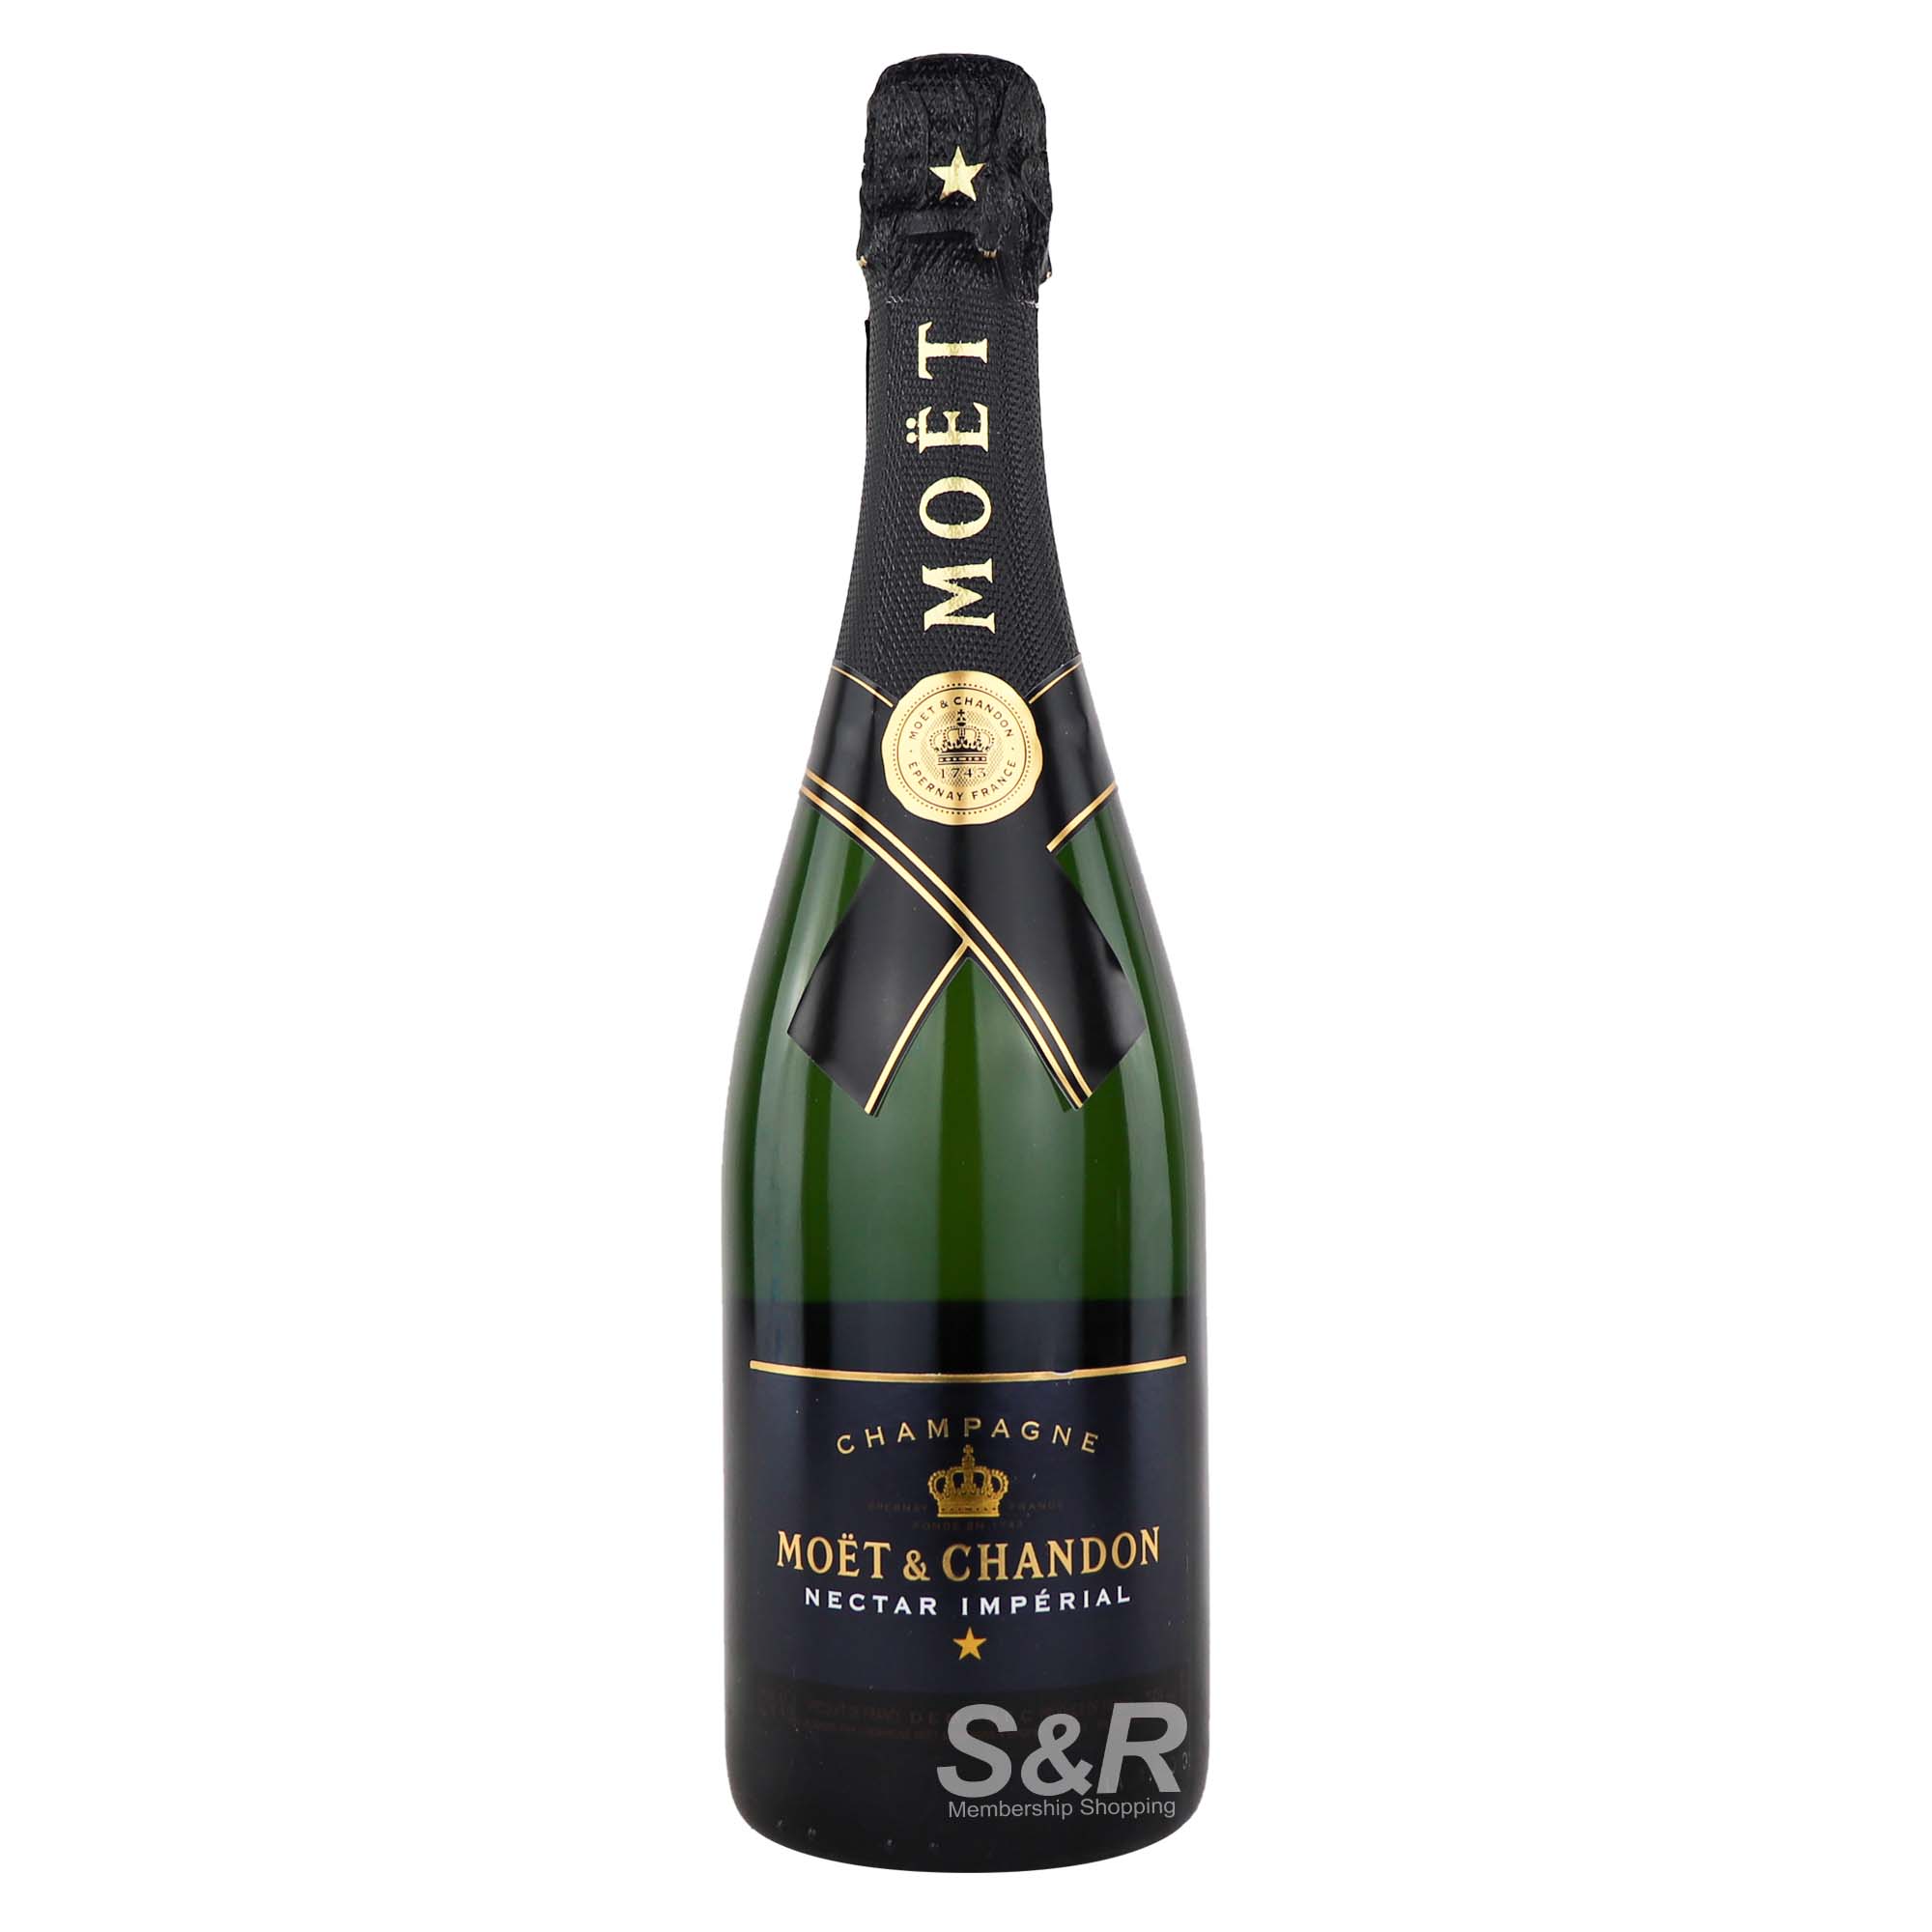 Moet & Chandon Nectar Imperial Champagne 750mL